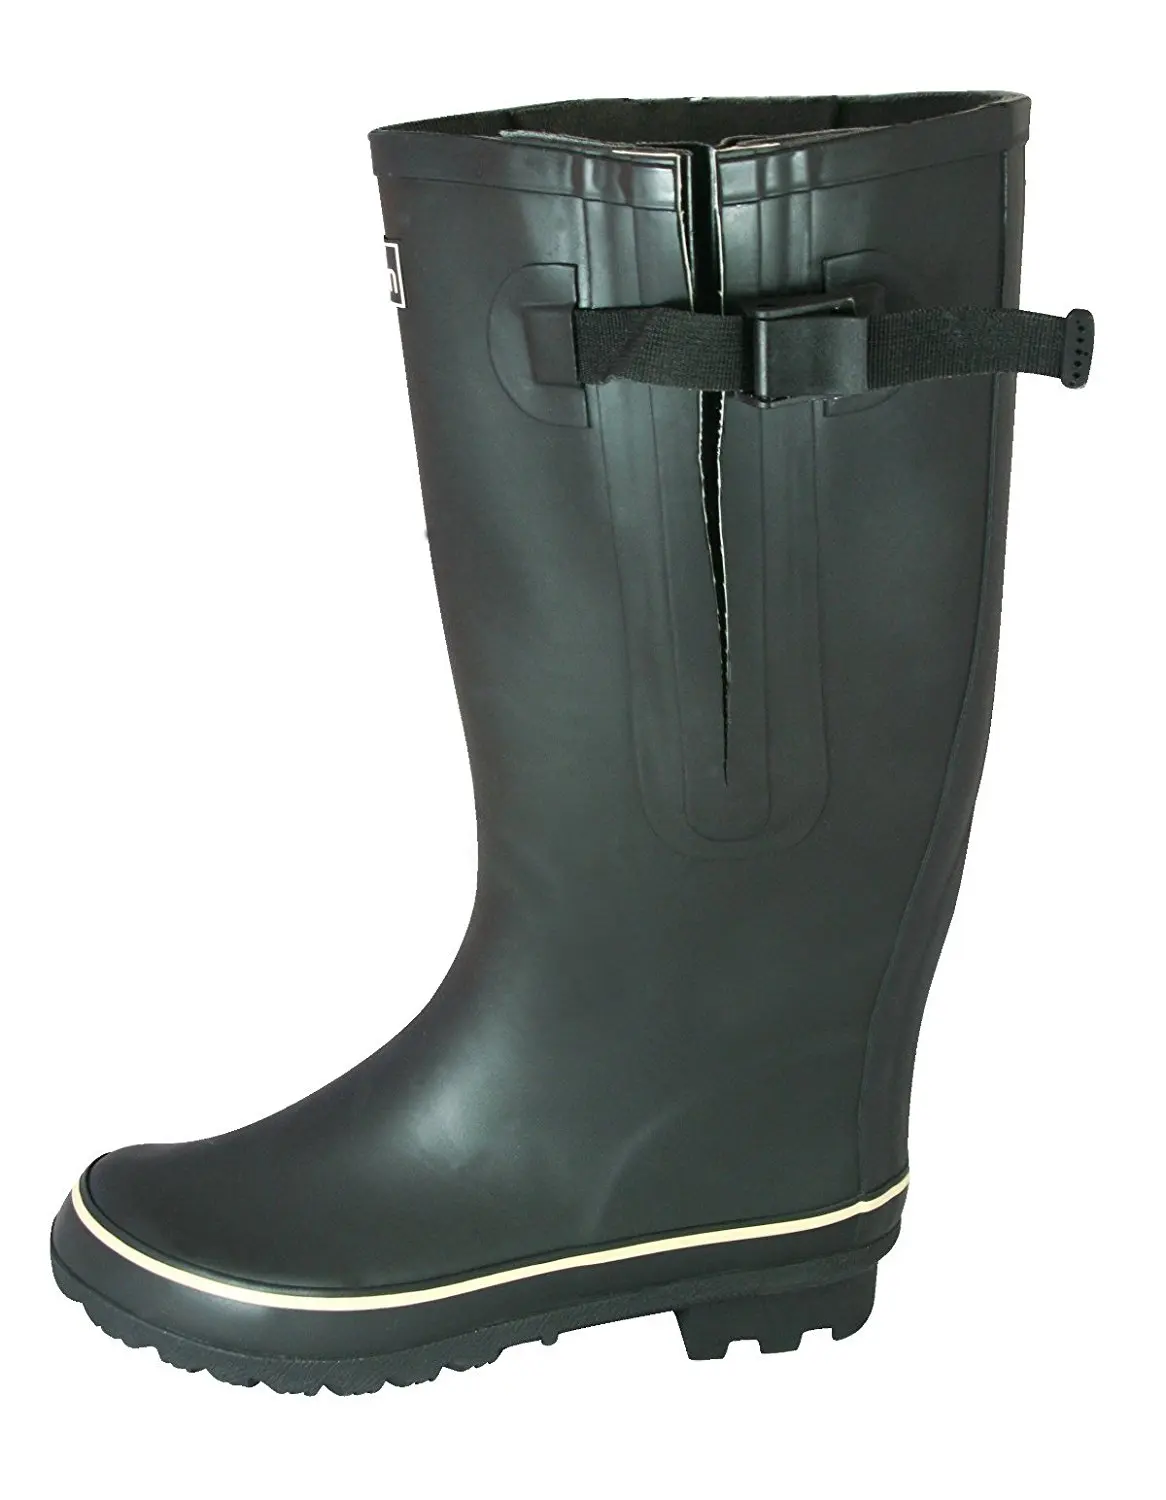 21 inch wide calf boots